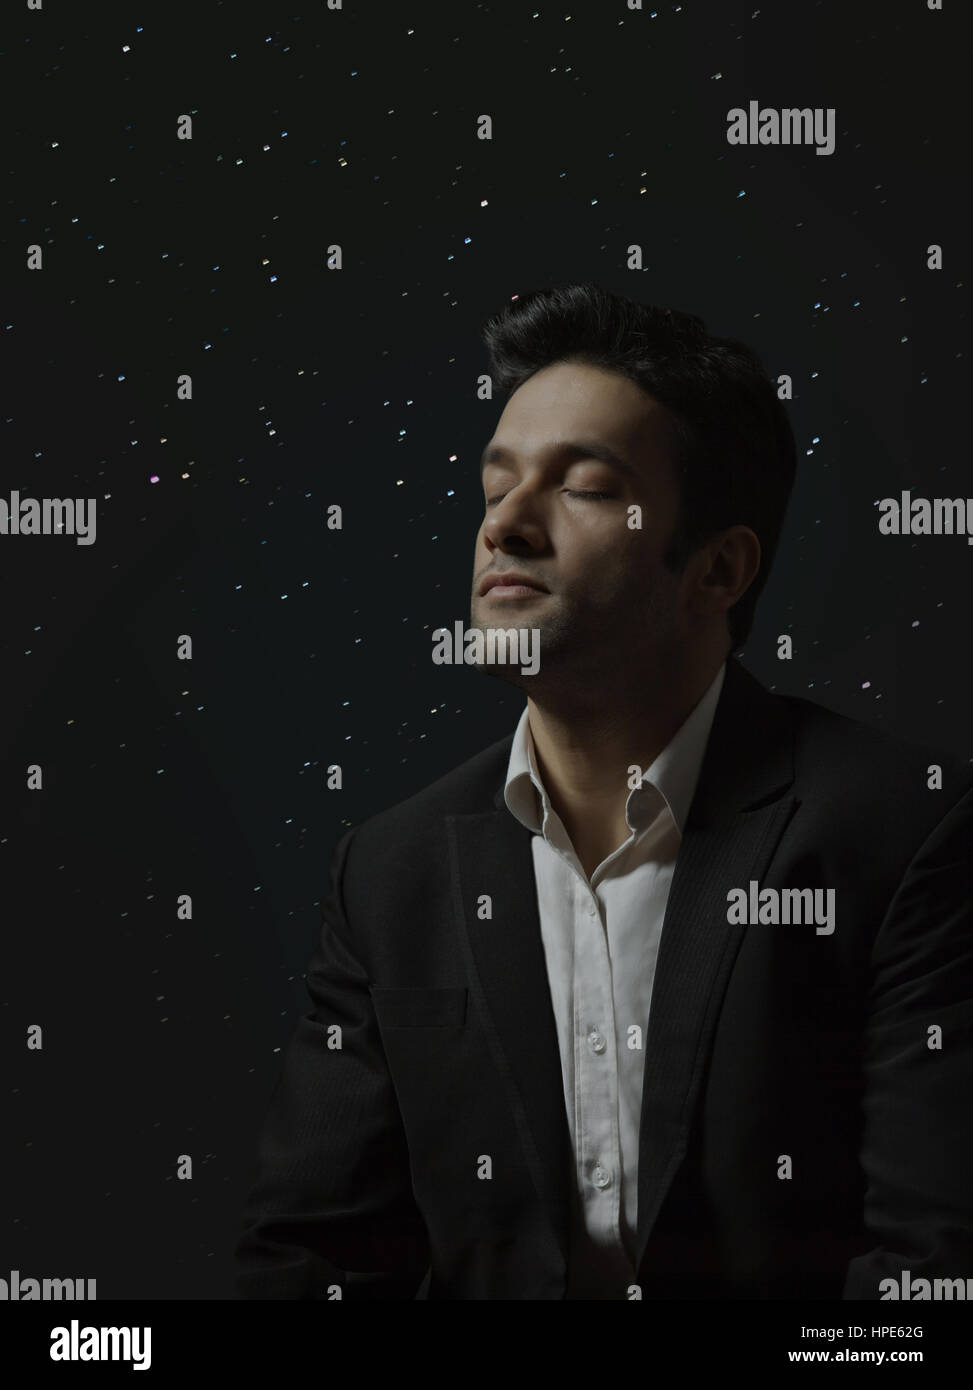 Man thinking with closed eyes against background of glowing lights or starry sky Stock Photo